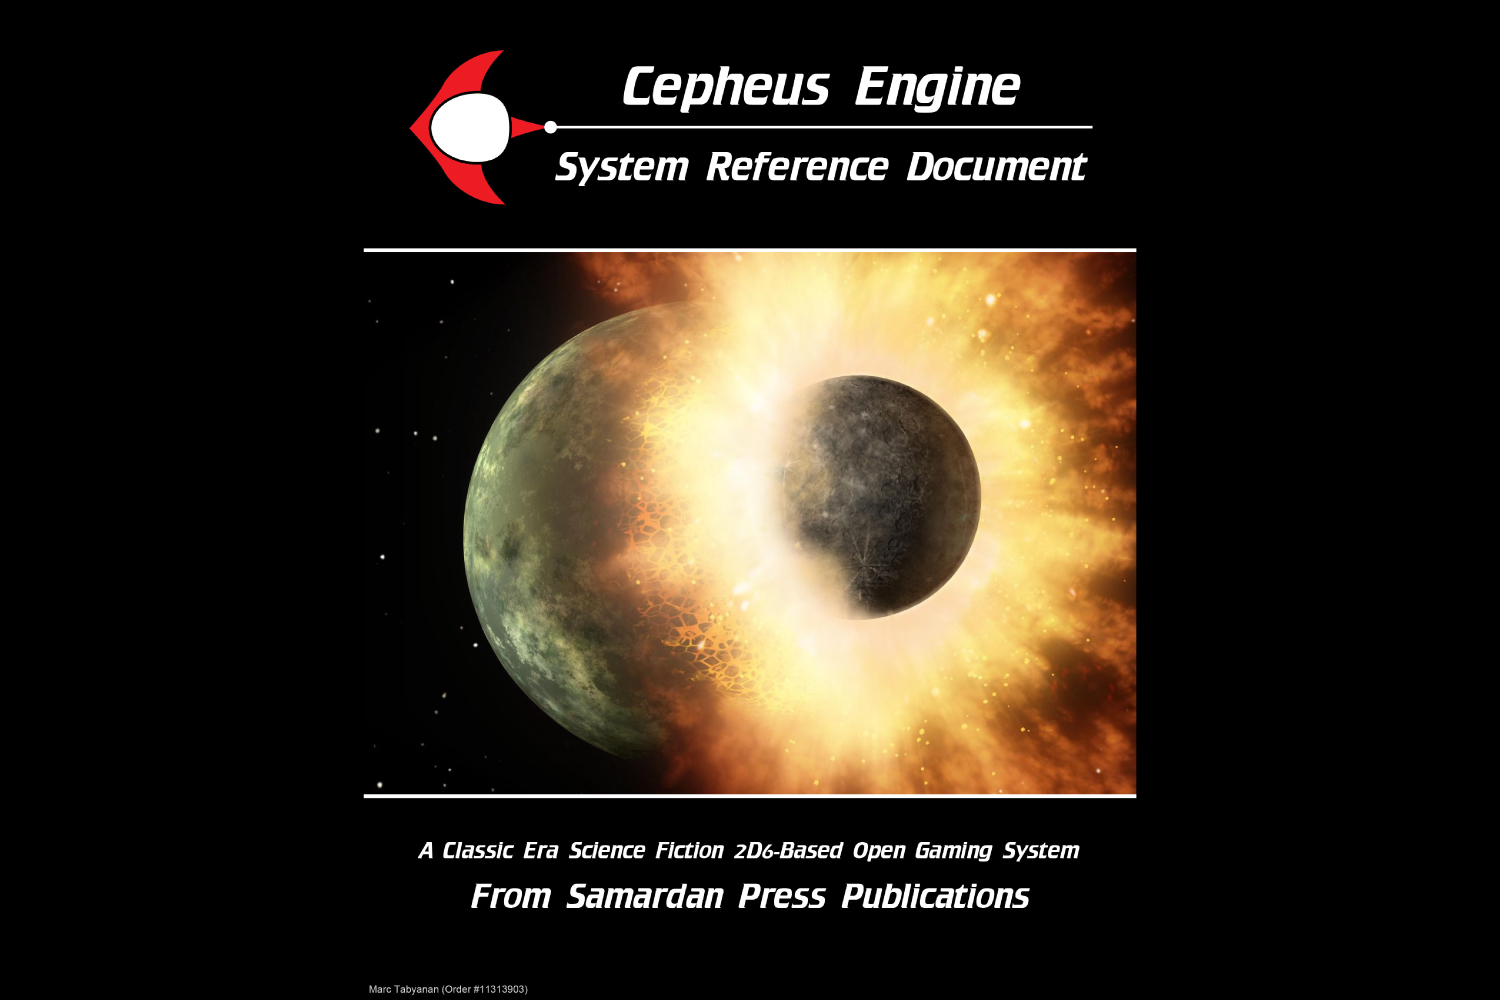 Why I Chose Cepheus Engine for SF Roleplaying